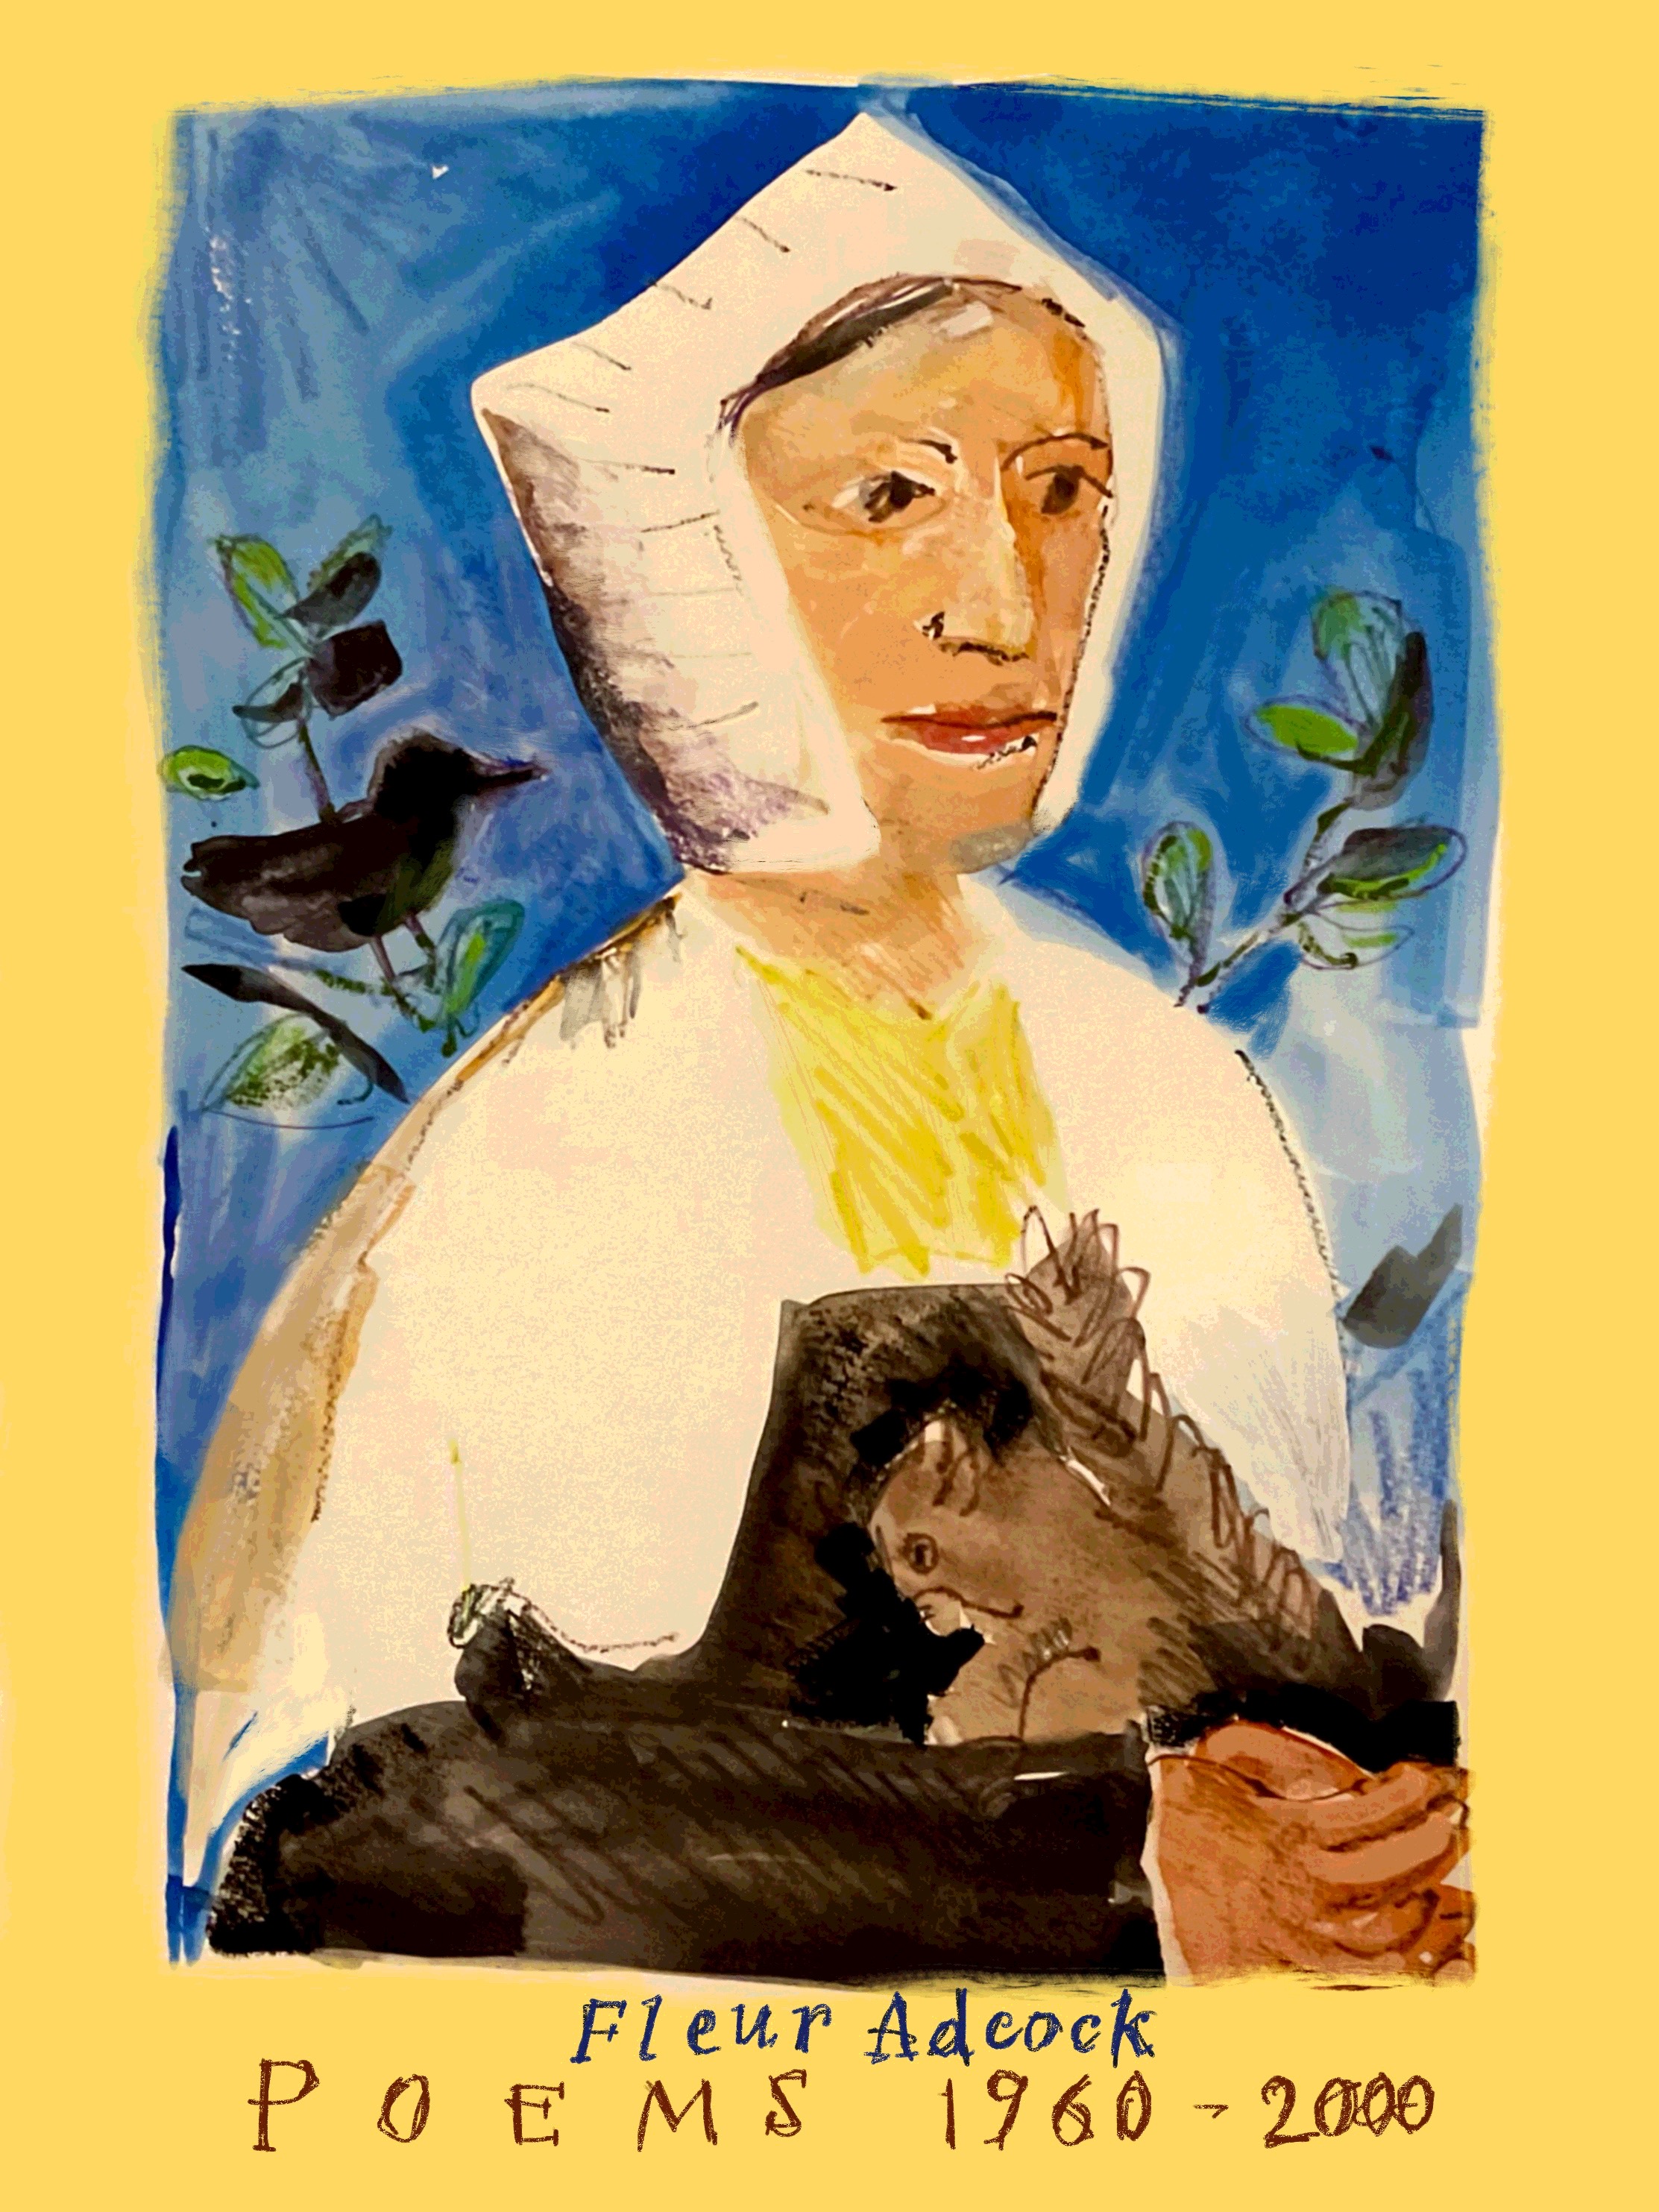 Digital drawing of book cover, with Tudor painting of a woman looking right, holding a squirrel, with blackbird behind her. Warm yellow border, with text "Fleur Adcock: Poems 1960-2000" 